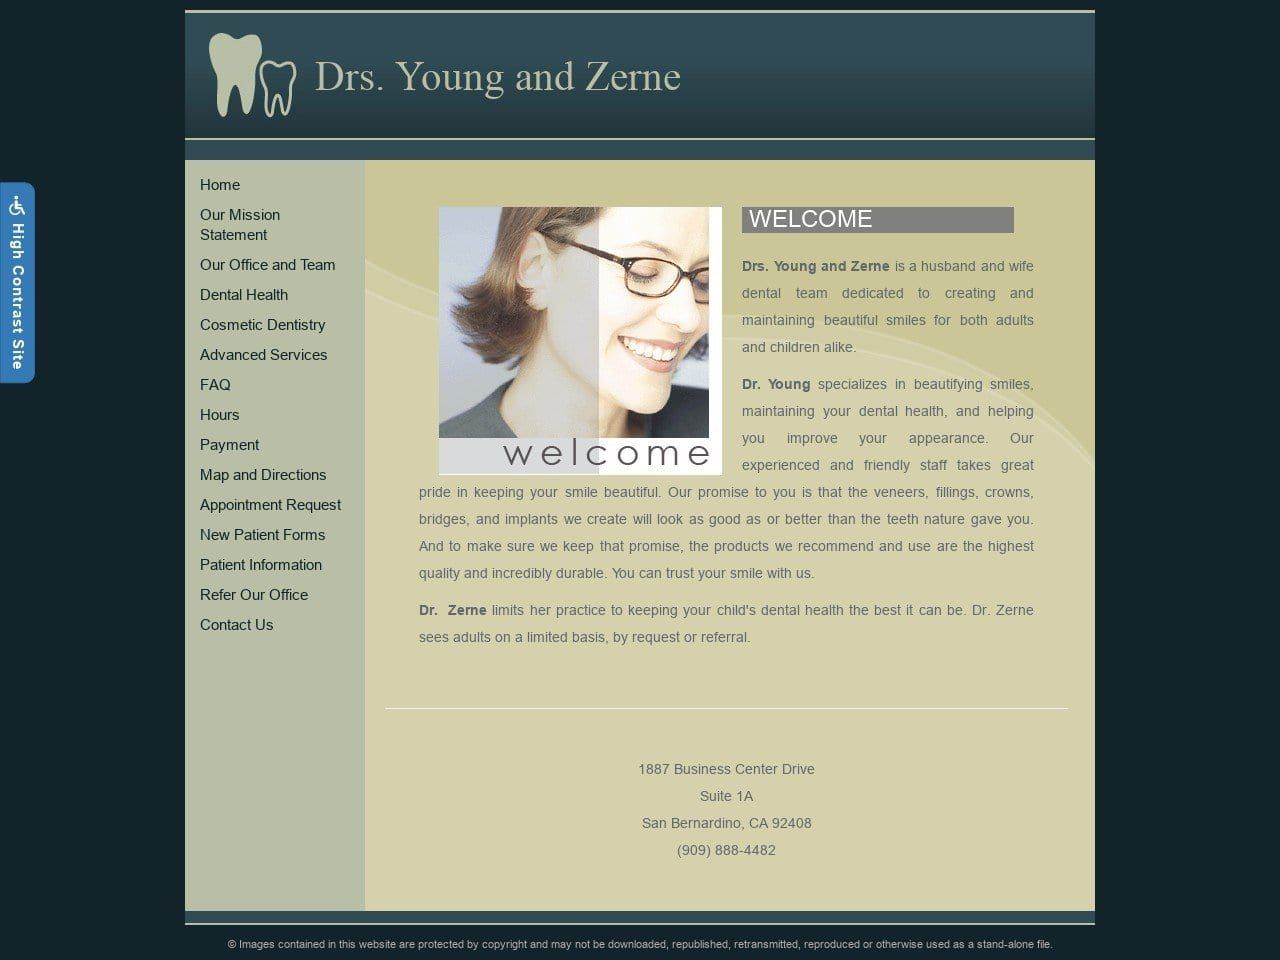 Drs. Young and Zerne Website Screenshot from youngandzernedds.com